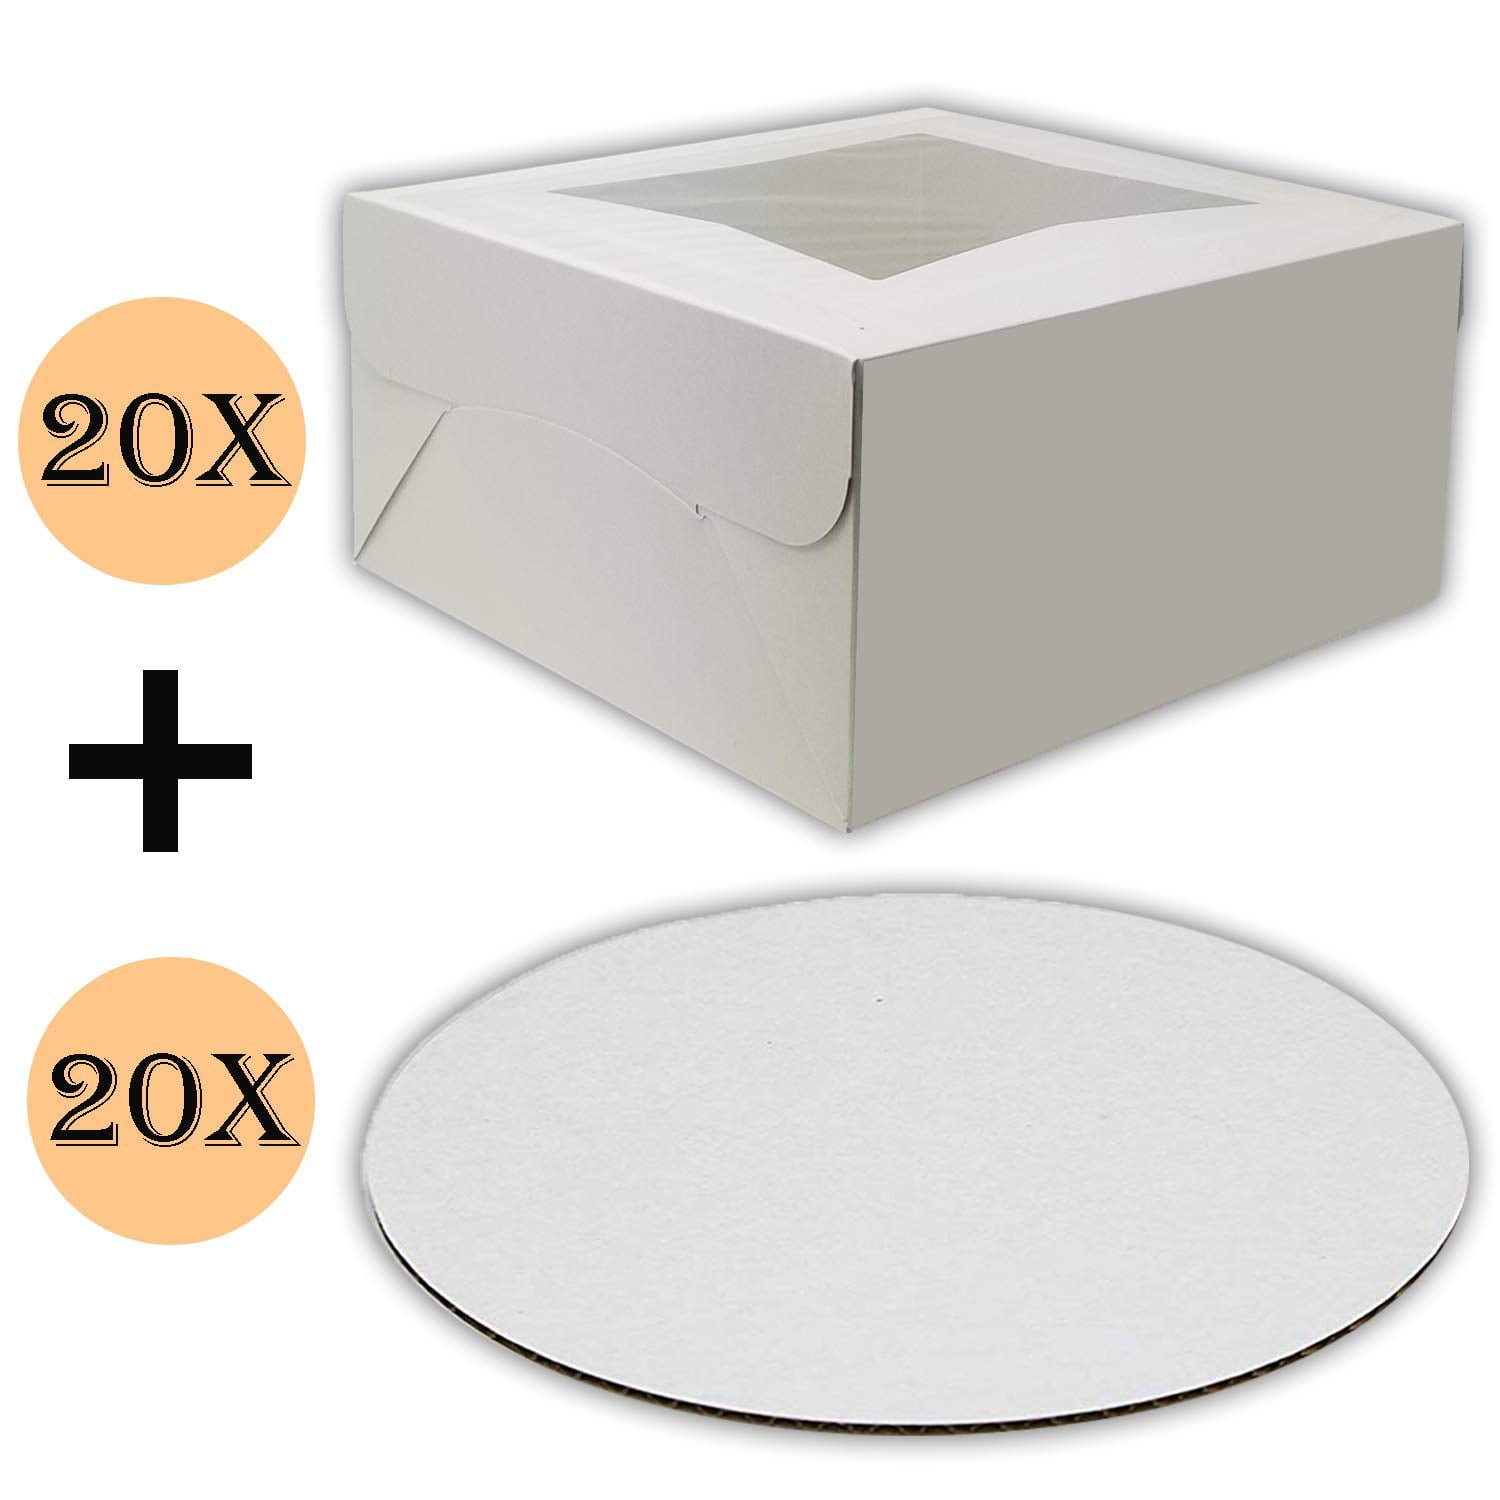 Cake Supplies,Pack of 15 Cake Boxes 10 x 10 x 5 and Cake Boards 10 Inch White Bakery Box Has Double Window Cake Board is Round 